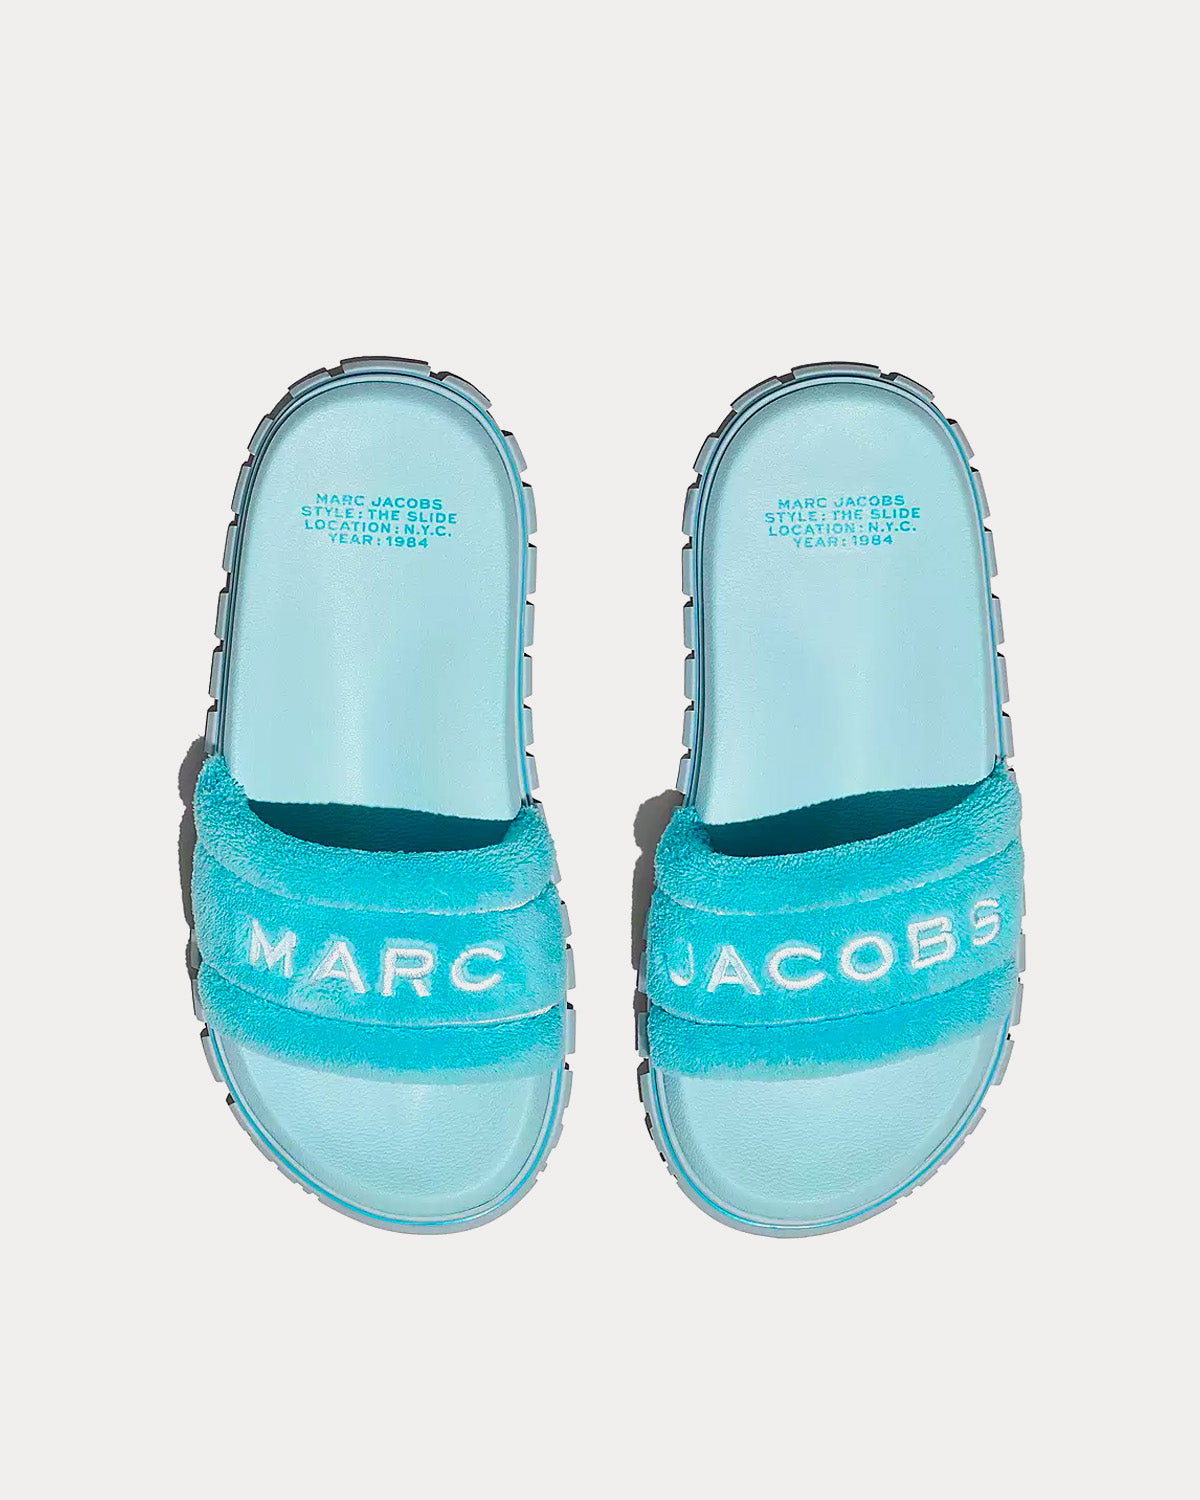 Marc Jacobs - The Terry Blue Slides